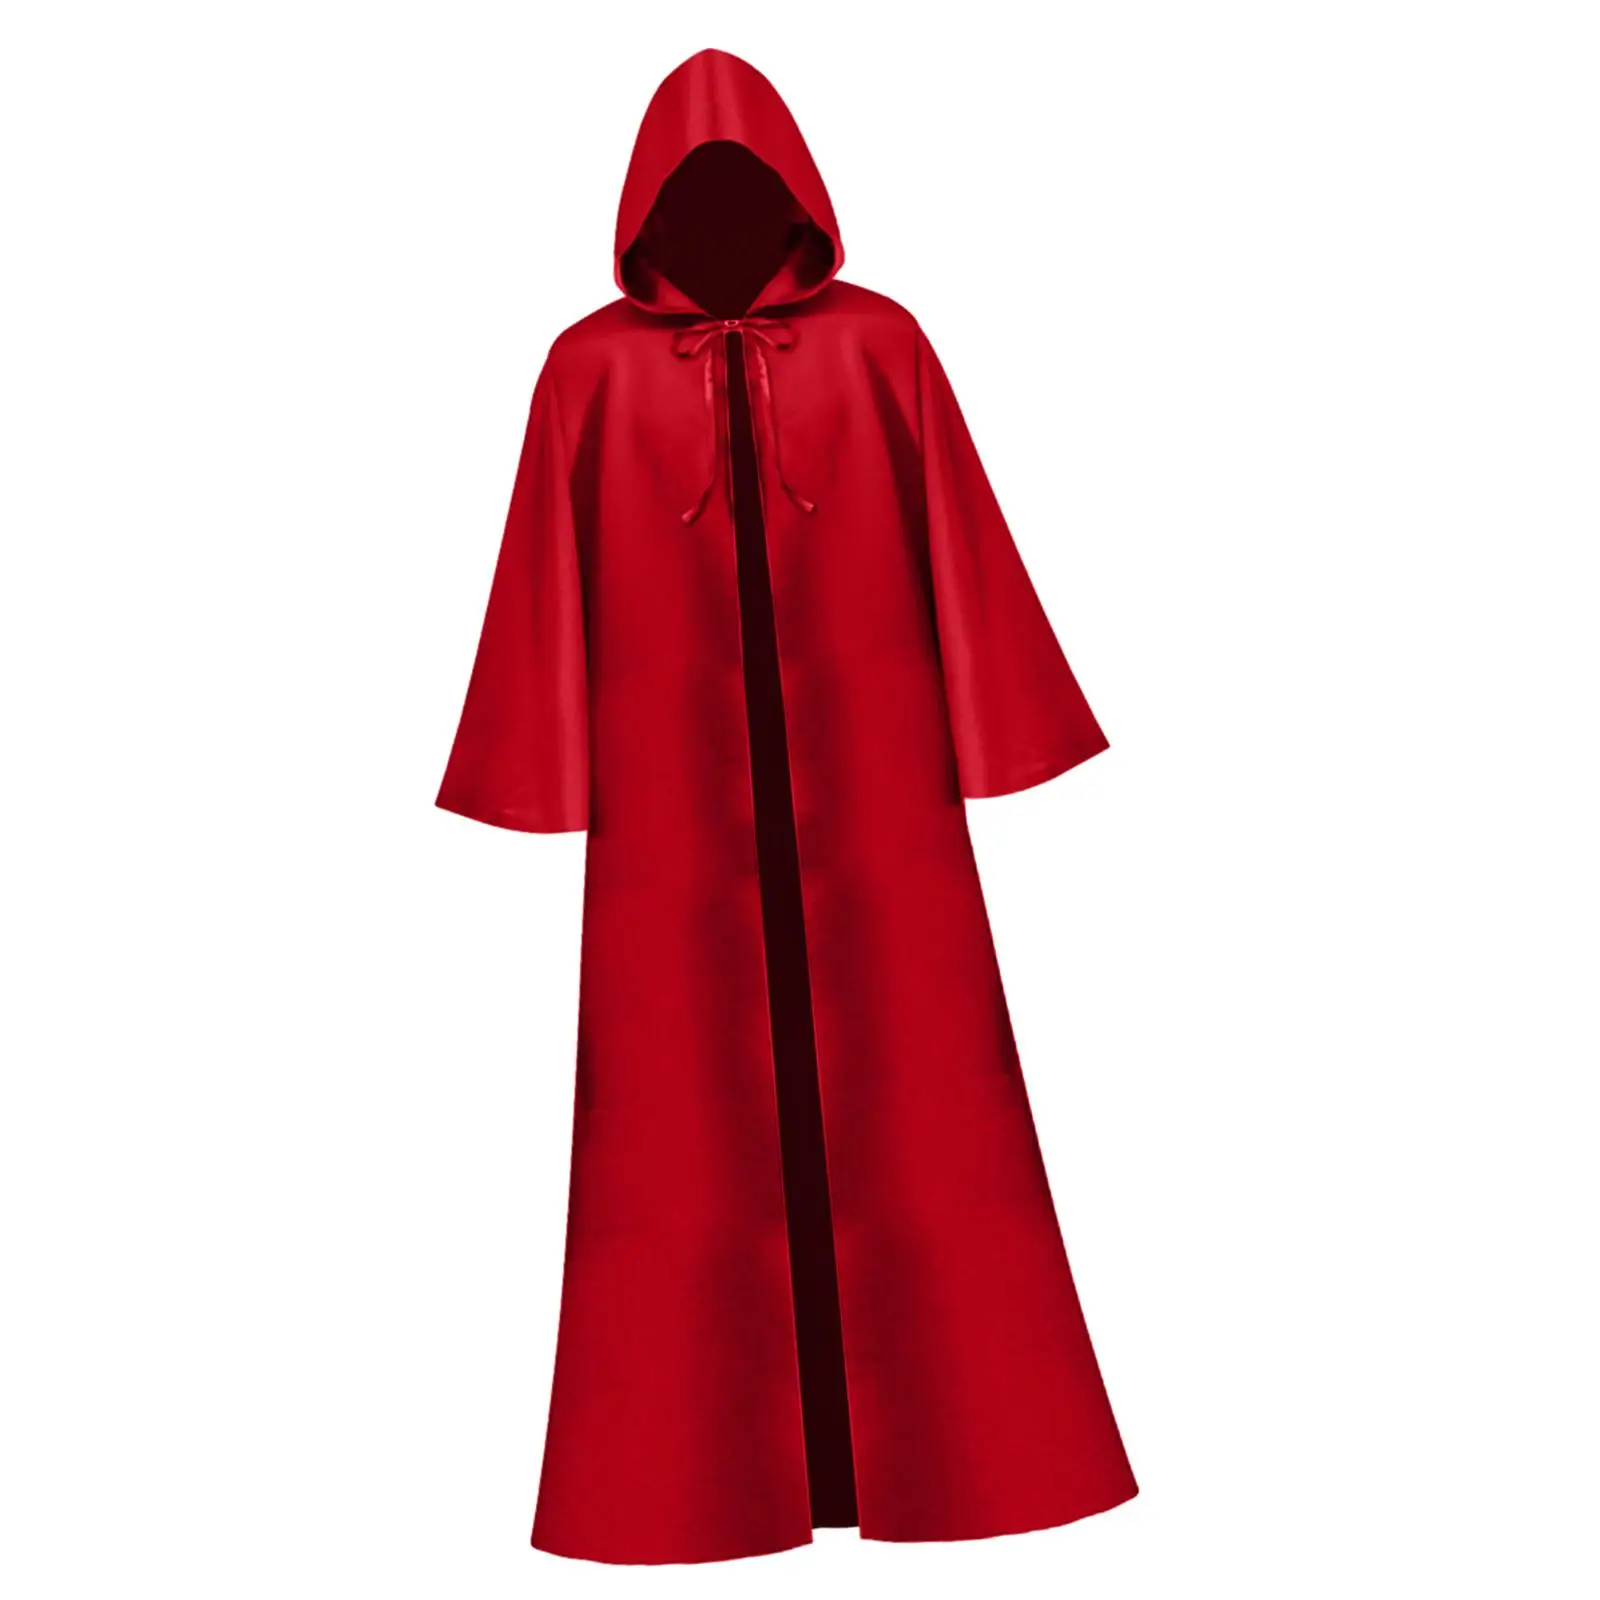 Halloween Cloak Cowl Full Length Witch Cape Robe Cosplay Cape for Easter Punk Party Fancy Dress Party Carnival Vintage Gathering